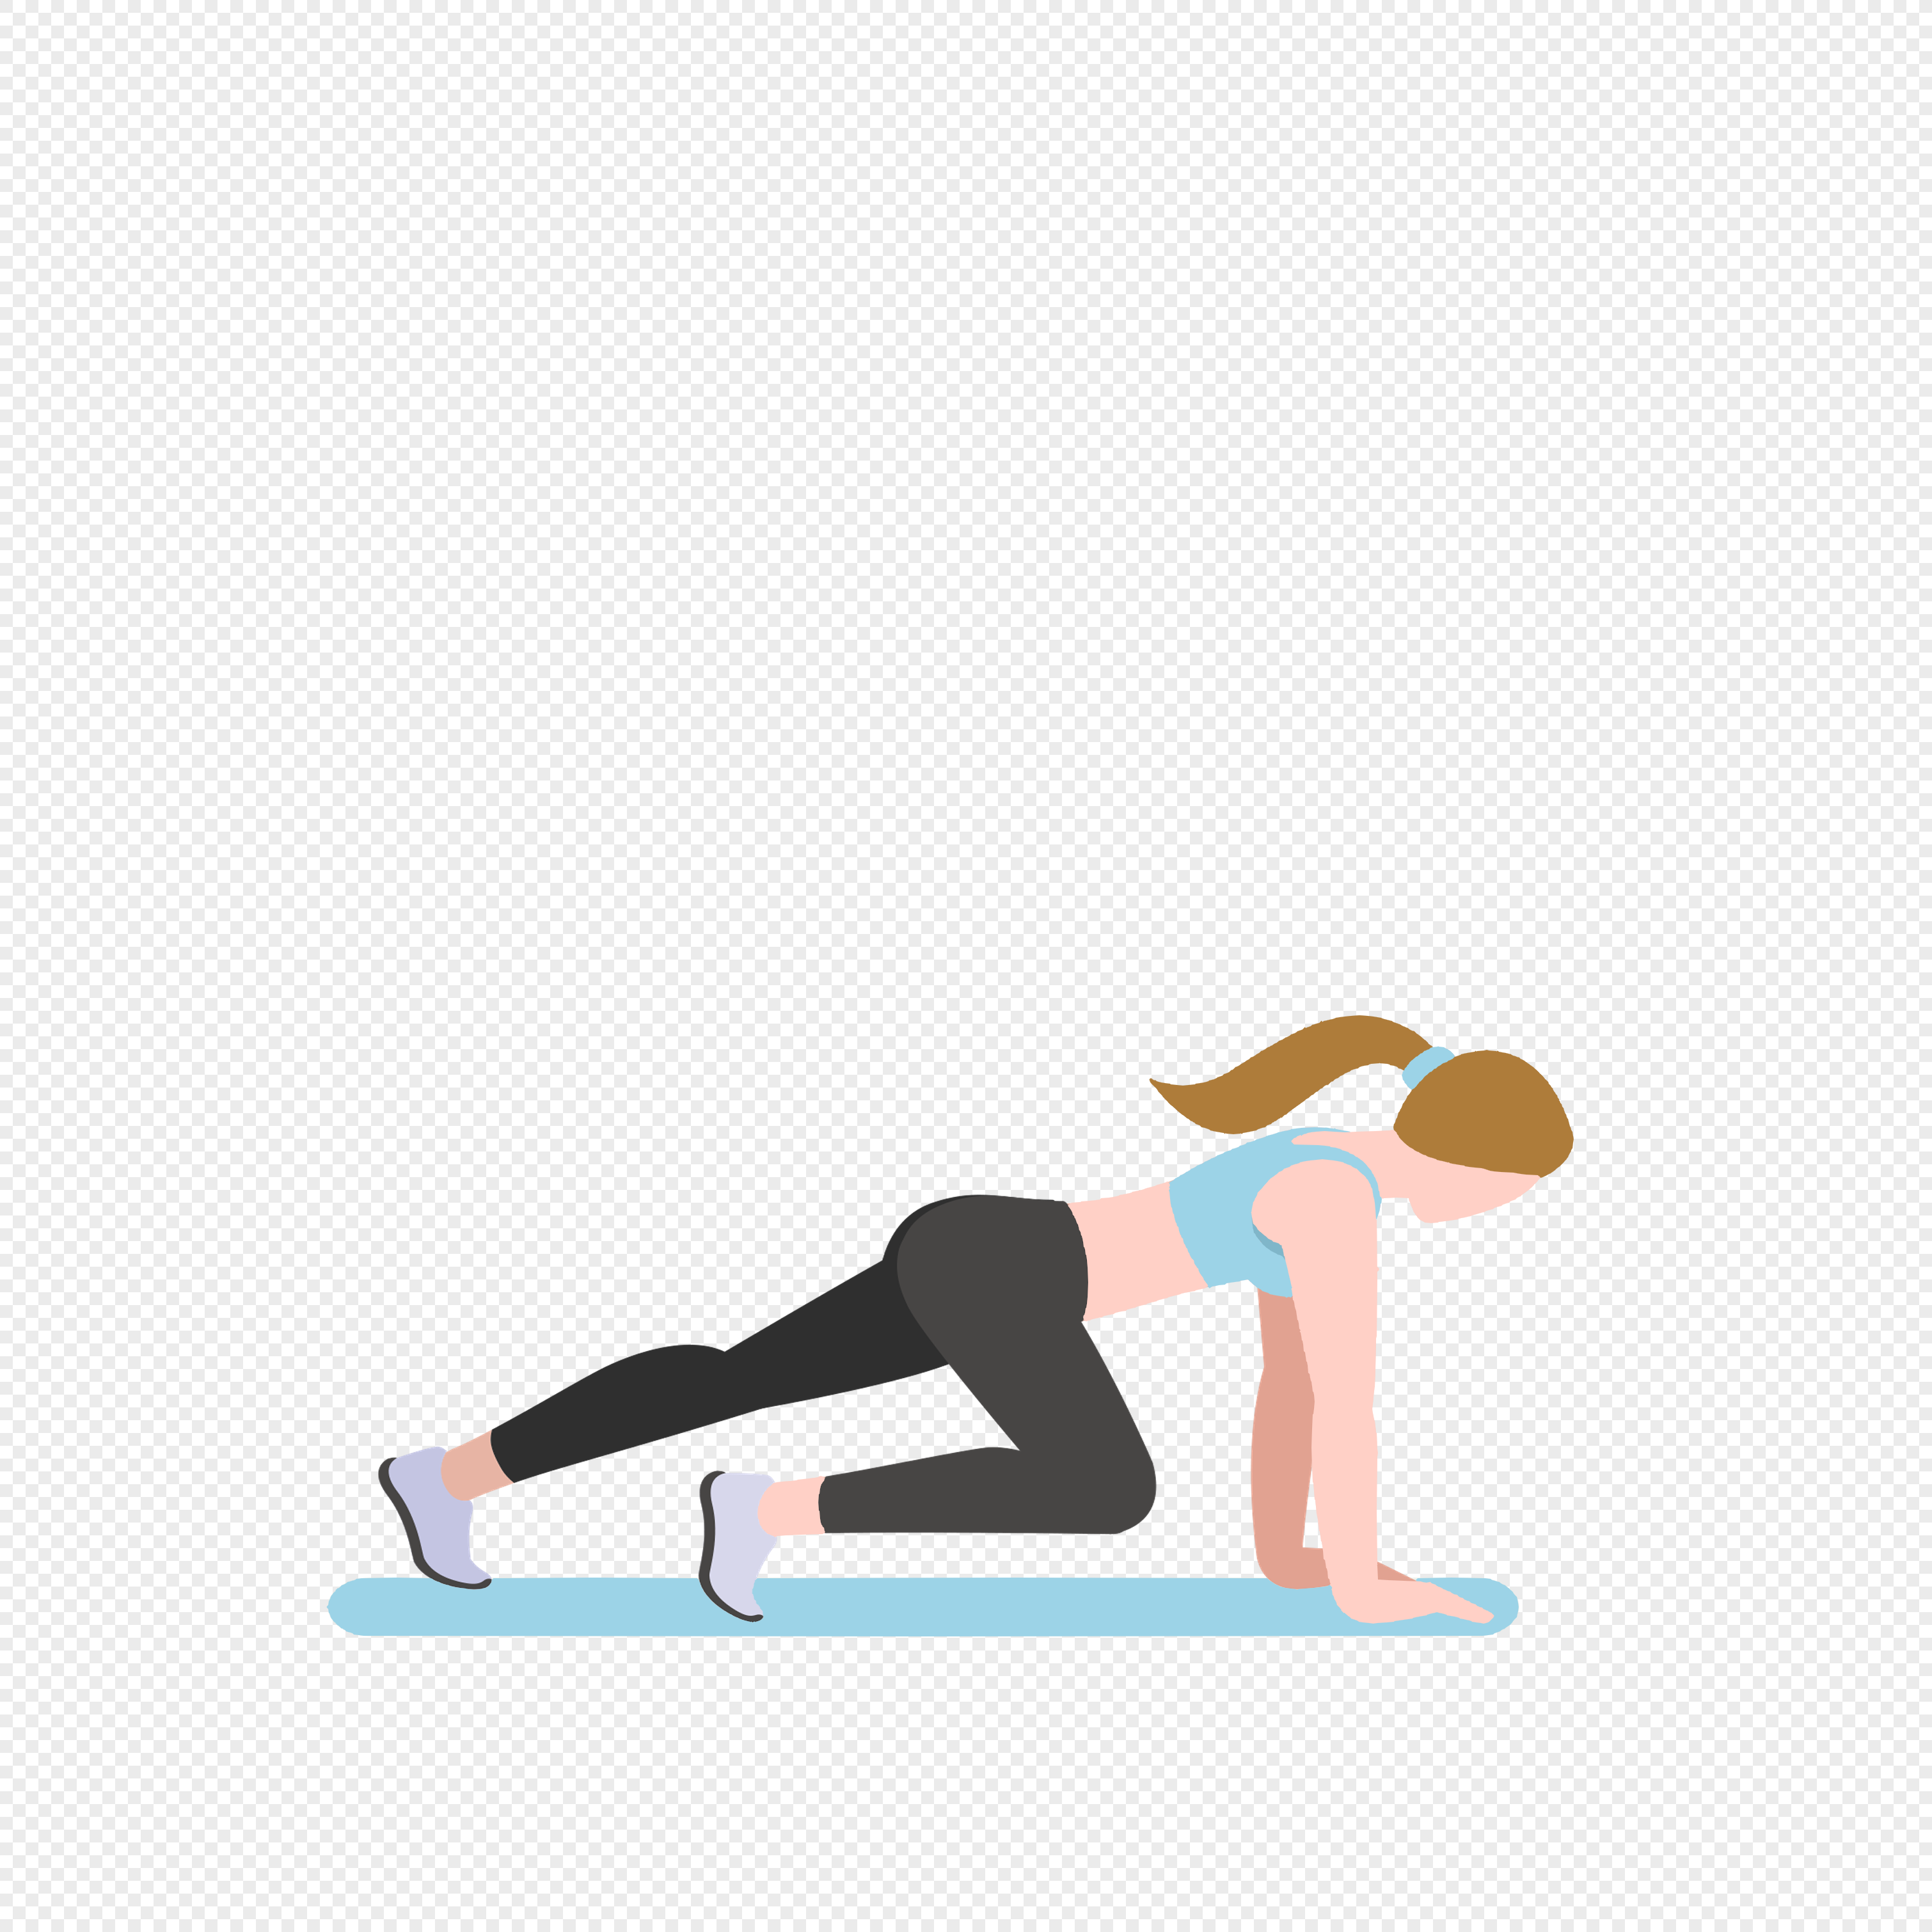 Exercise Cartoon PNG Images With Transparent Background